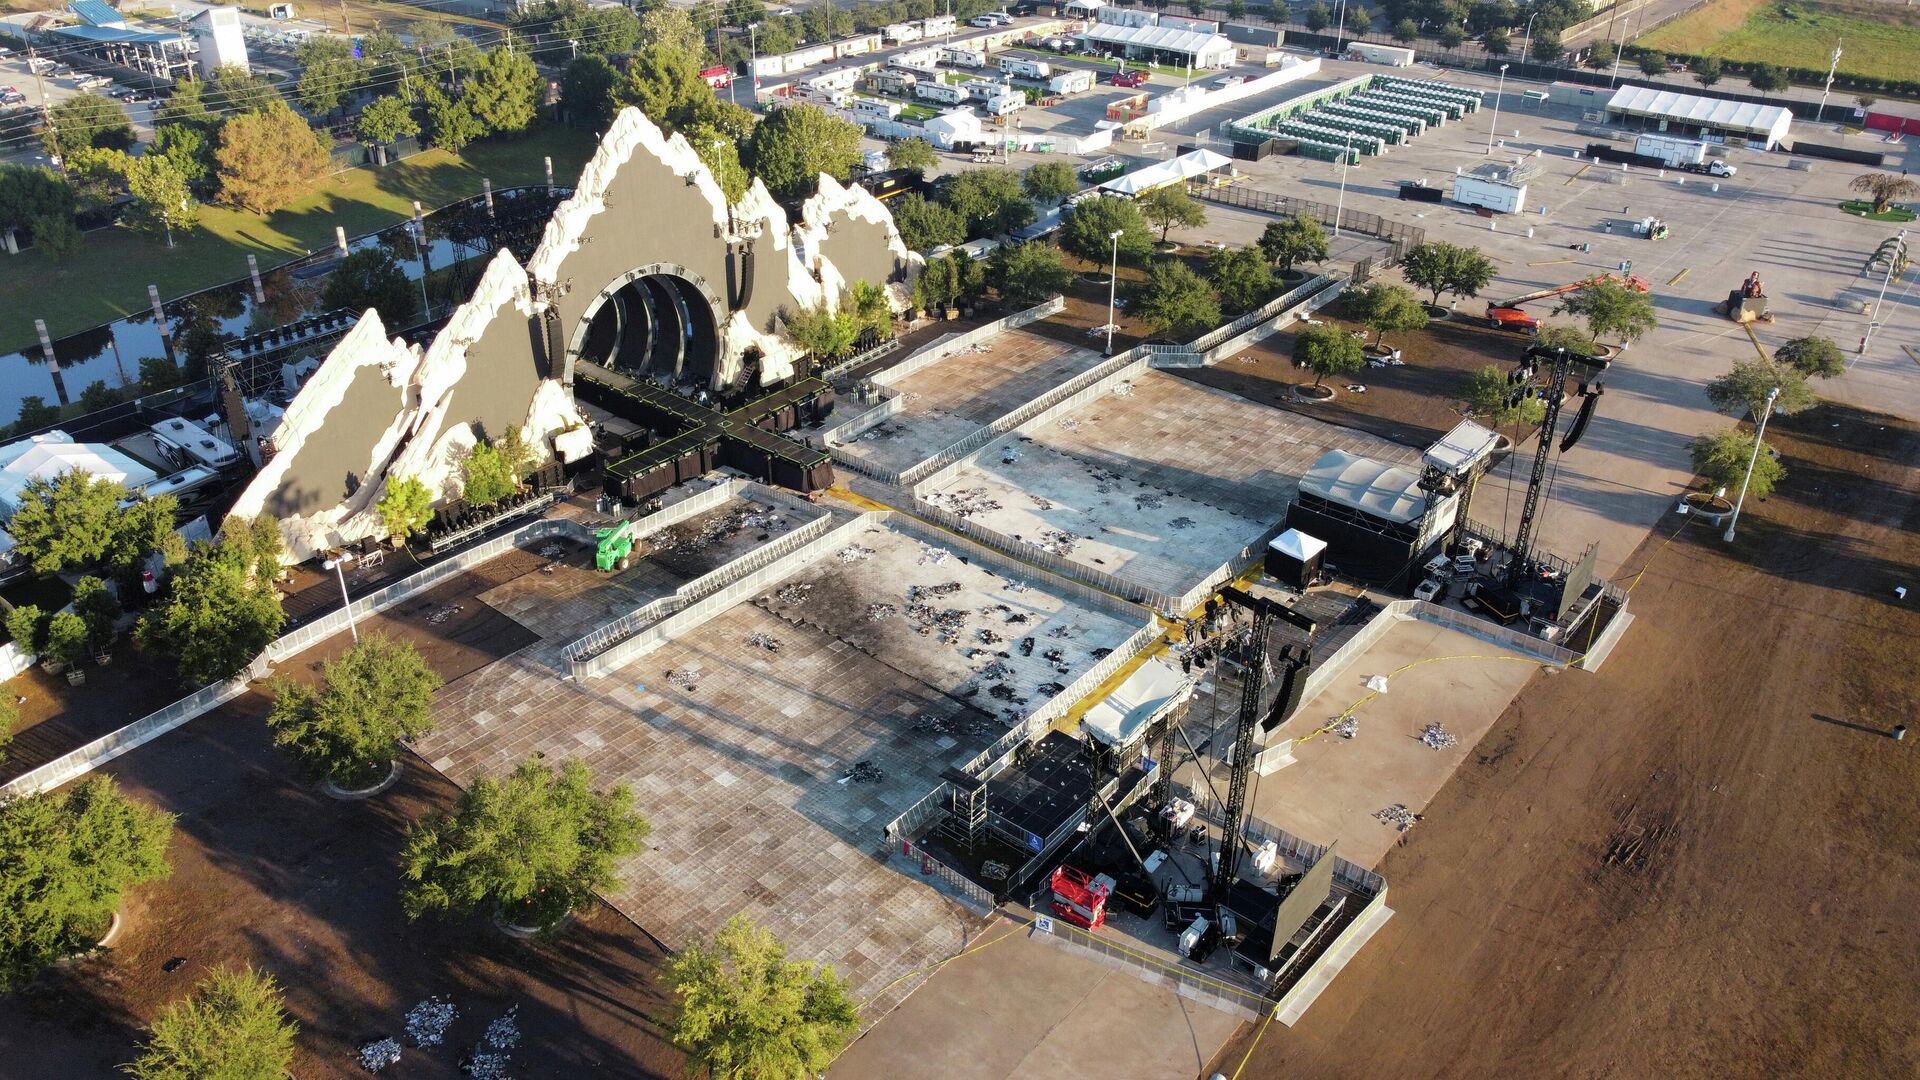 The empty stage at the 2021 Astroworld Festival is seen days after a stampede killed several concertgoers in Houston, Texas, U.S., November 7, 2021 - Sputnik International, 1920, 15.11.2021